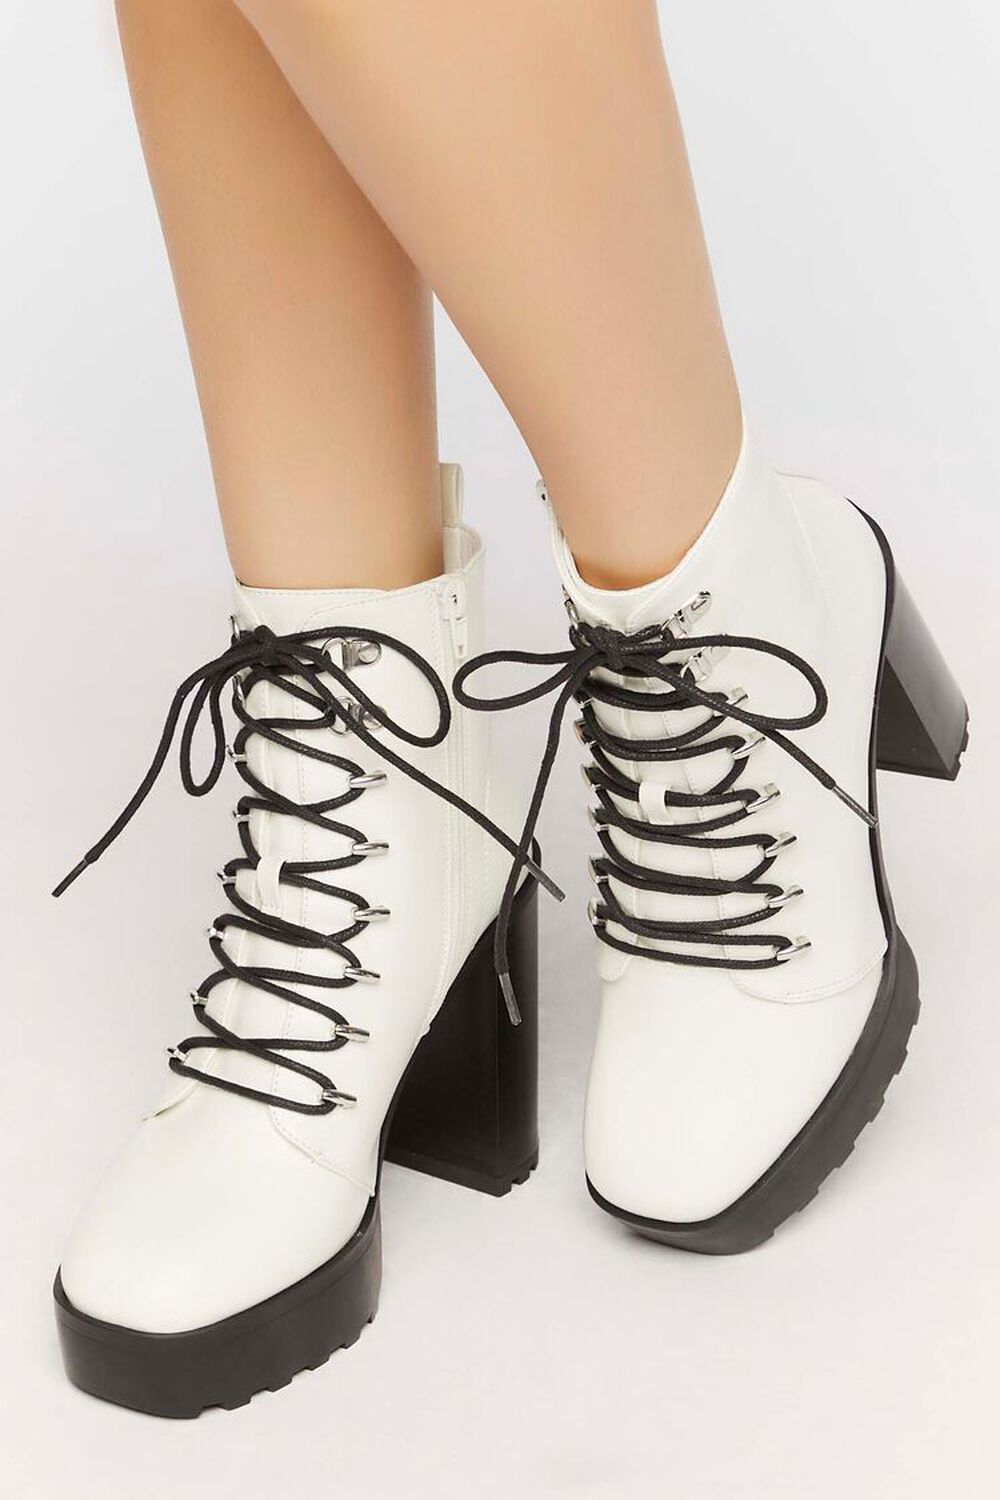 WHITE Faux Leather Lace-Up Booties, image 1